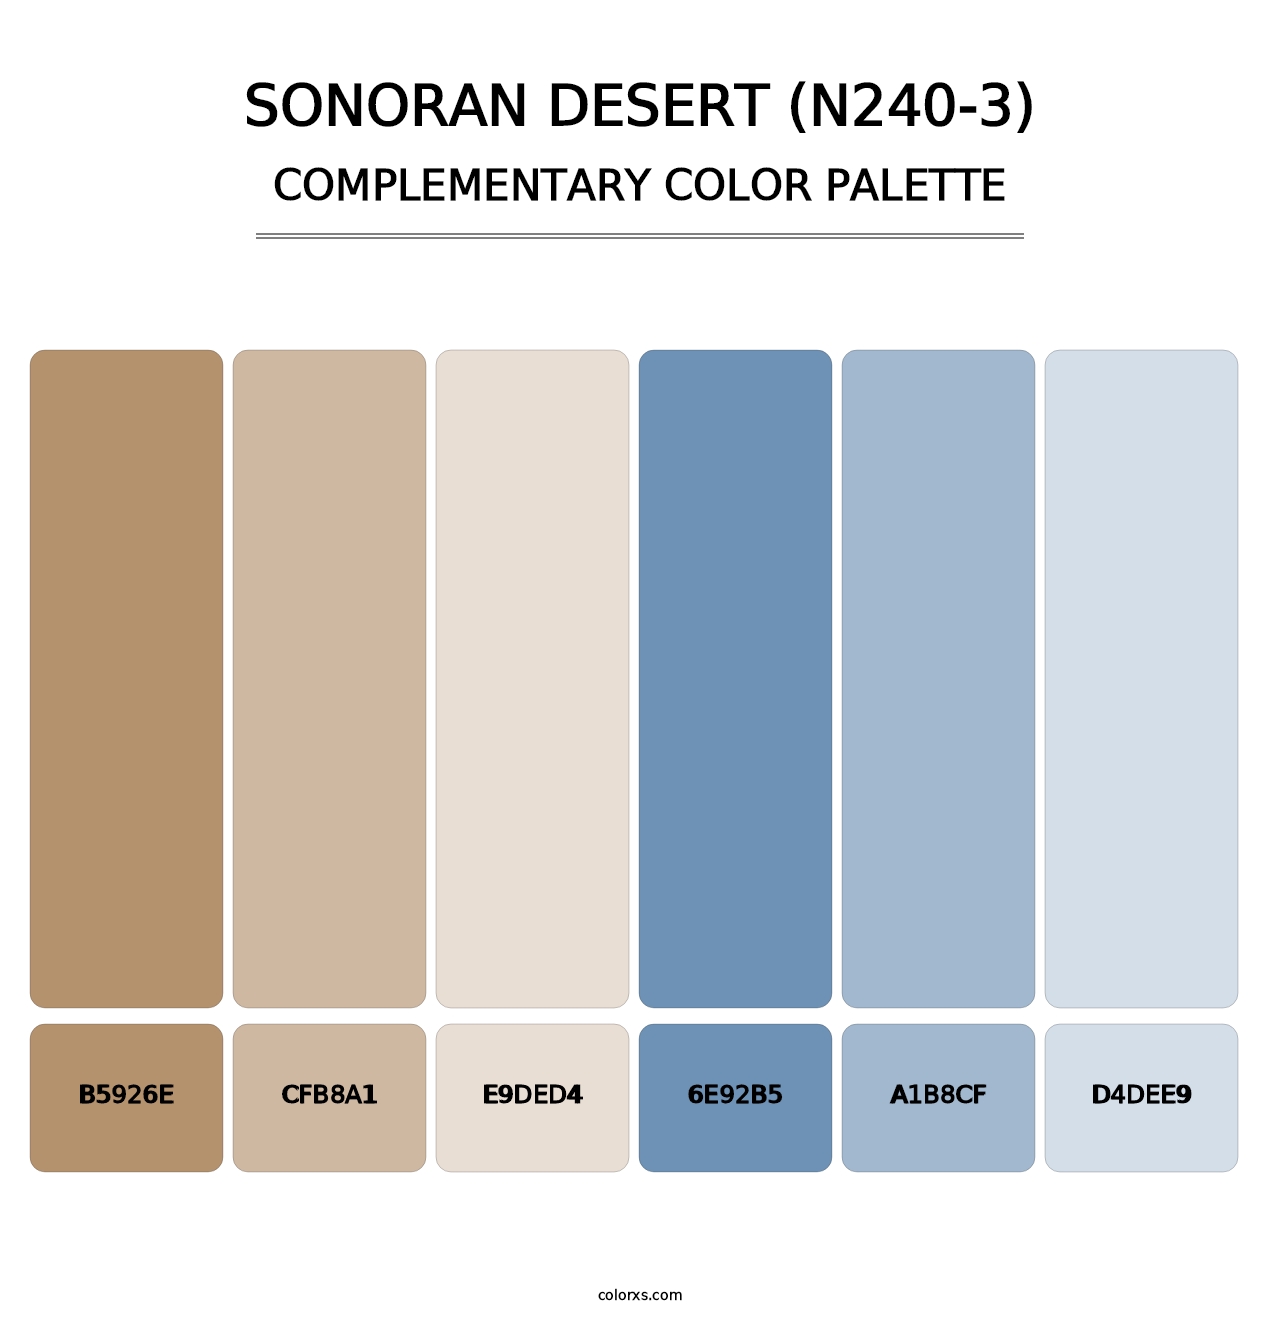 Sonoran Desert (N240-3) - Complementary Color Palette